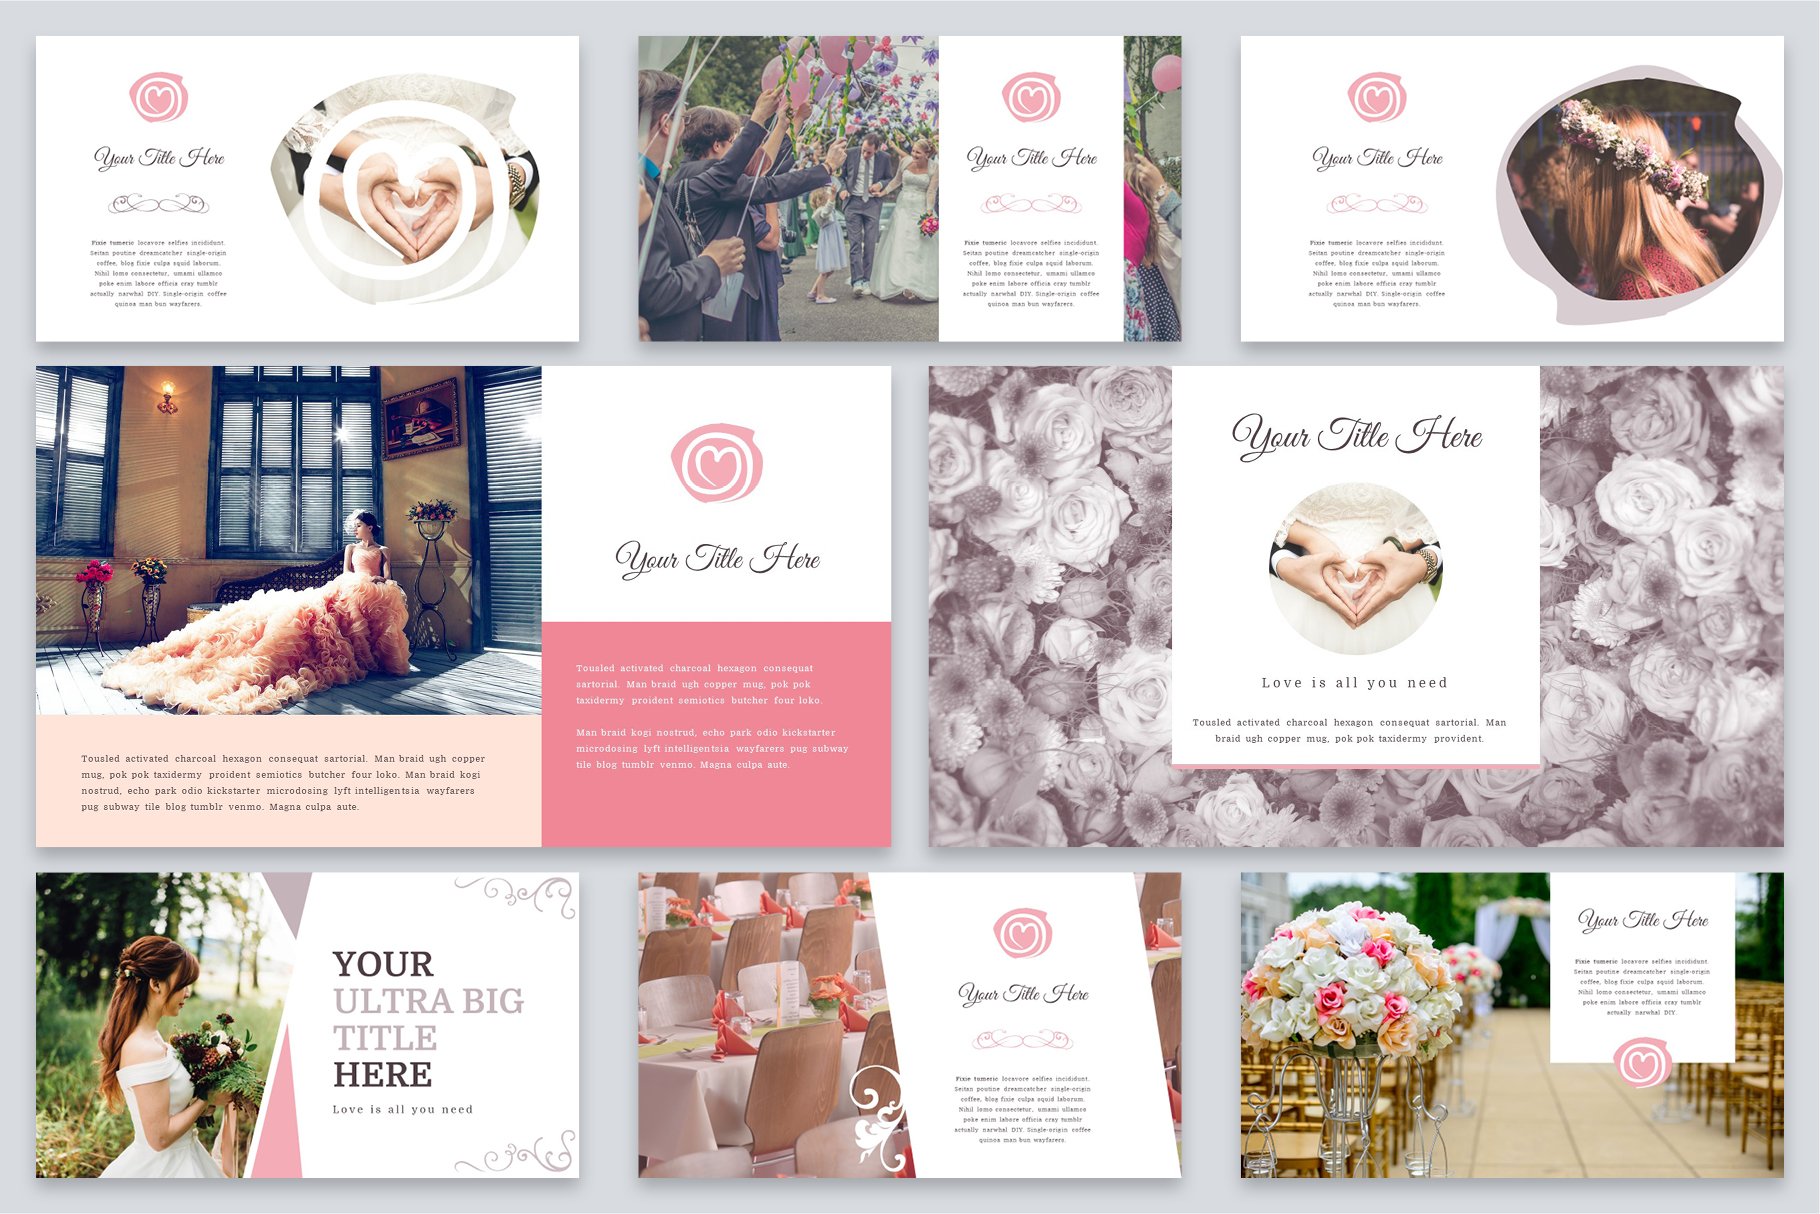 So stylish and elegant template for your wedding time.